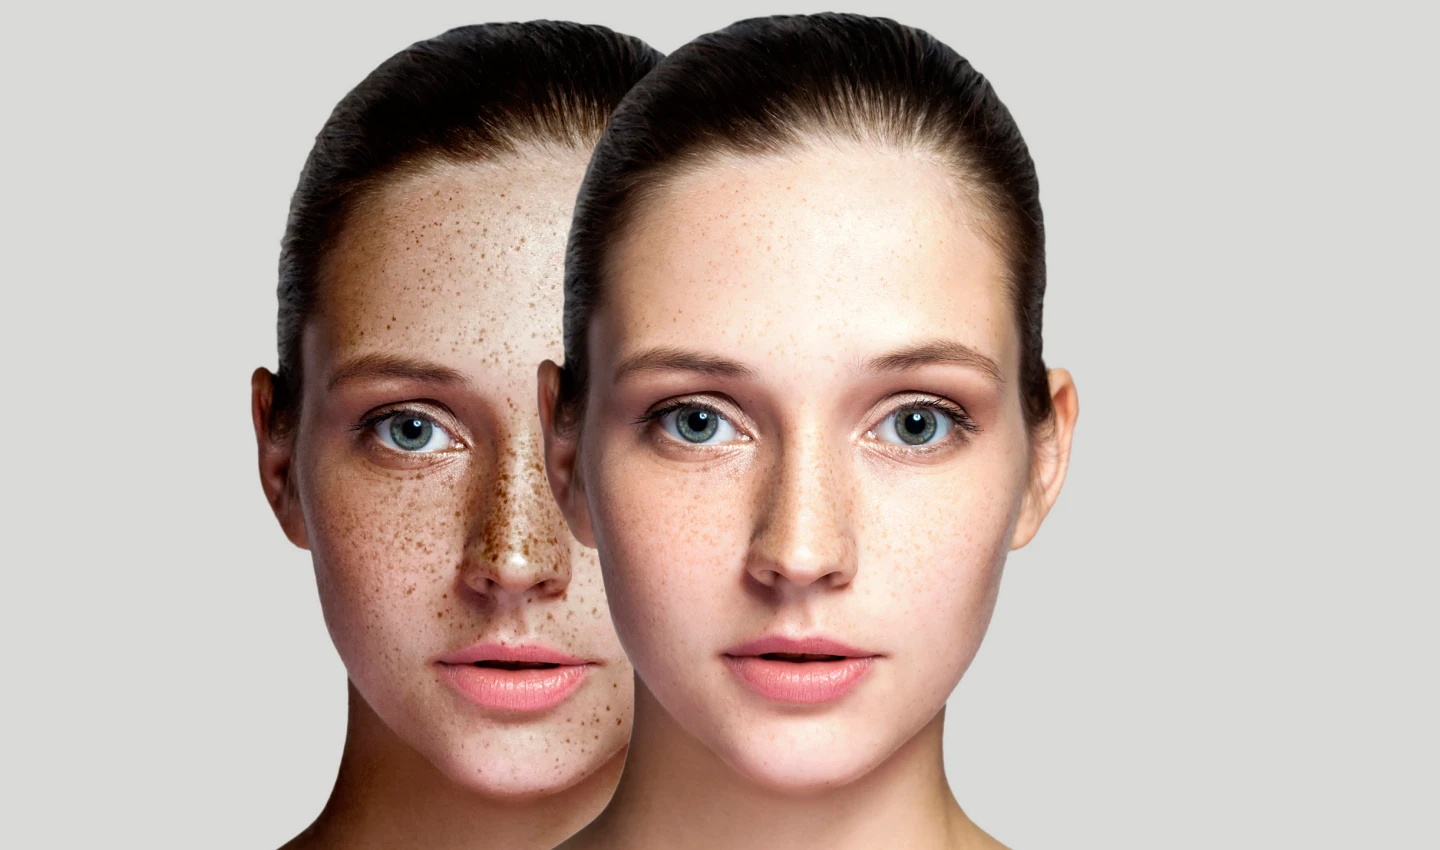 Before and after shots of a young woman's complexion. In the "before" shot, she has dark spots on her face. In the "after" shot, her complexion is clear and even-toned.